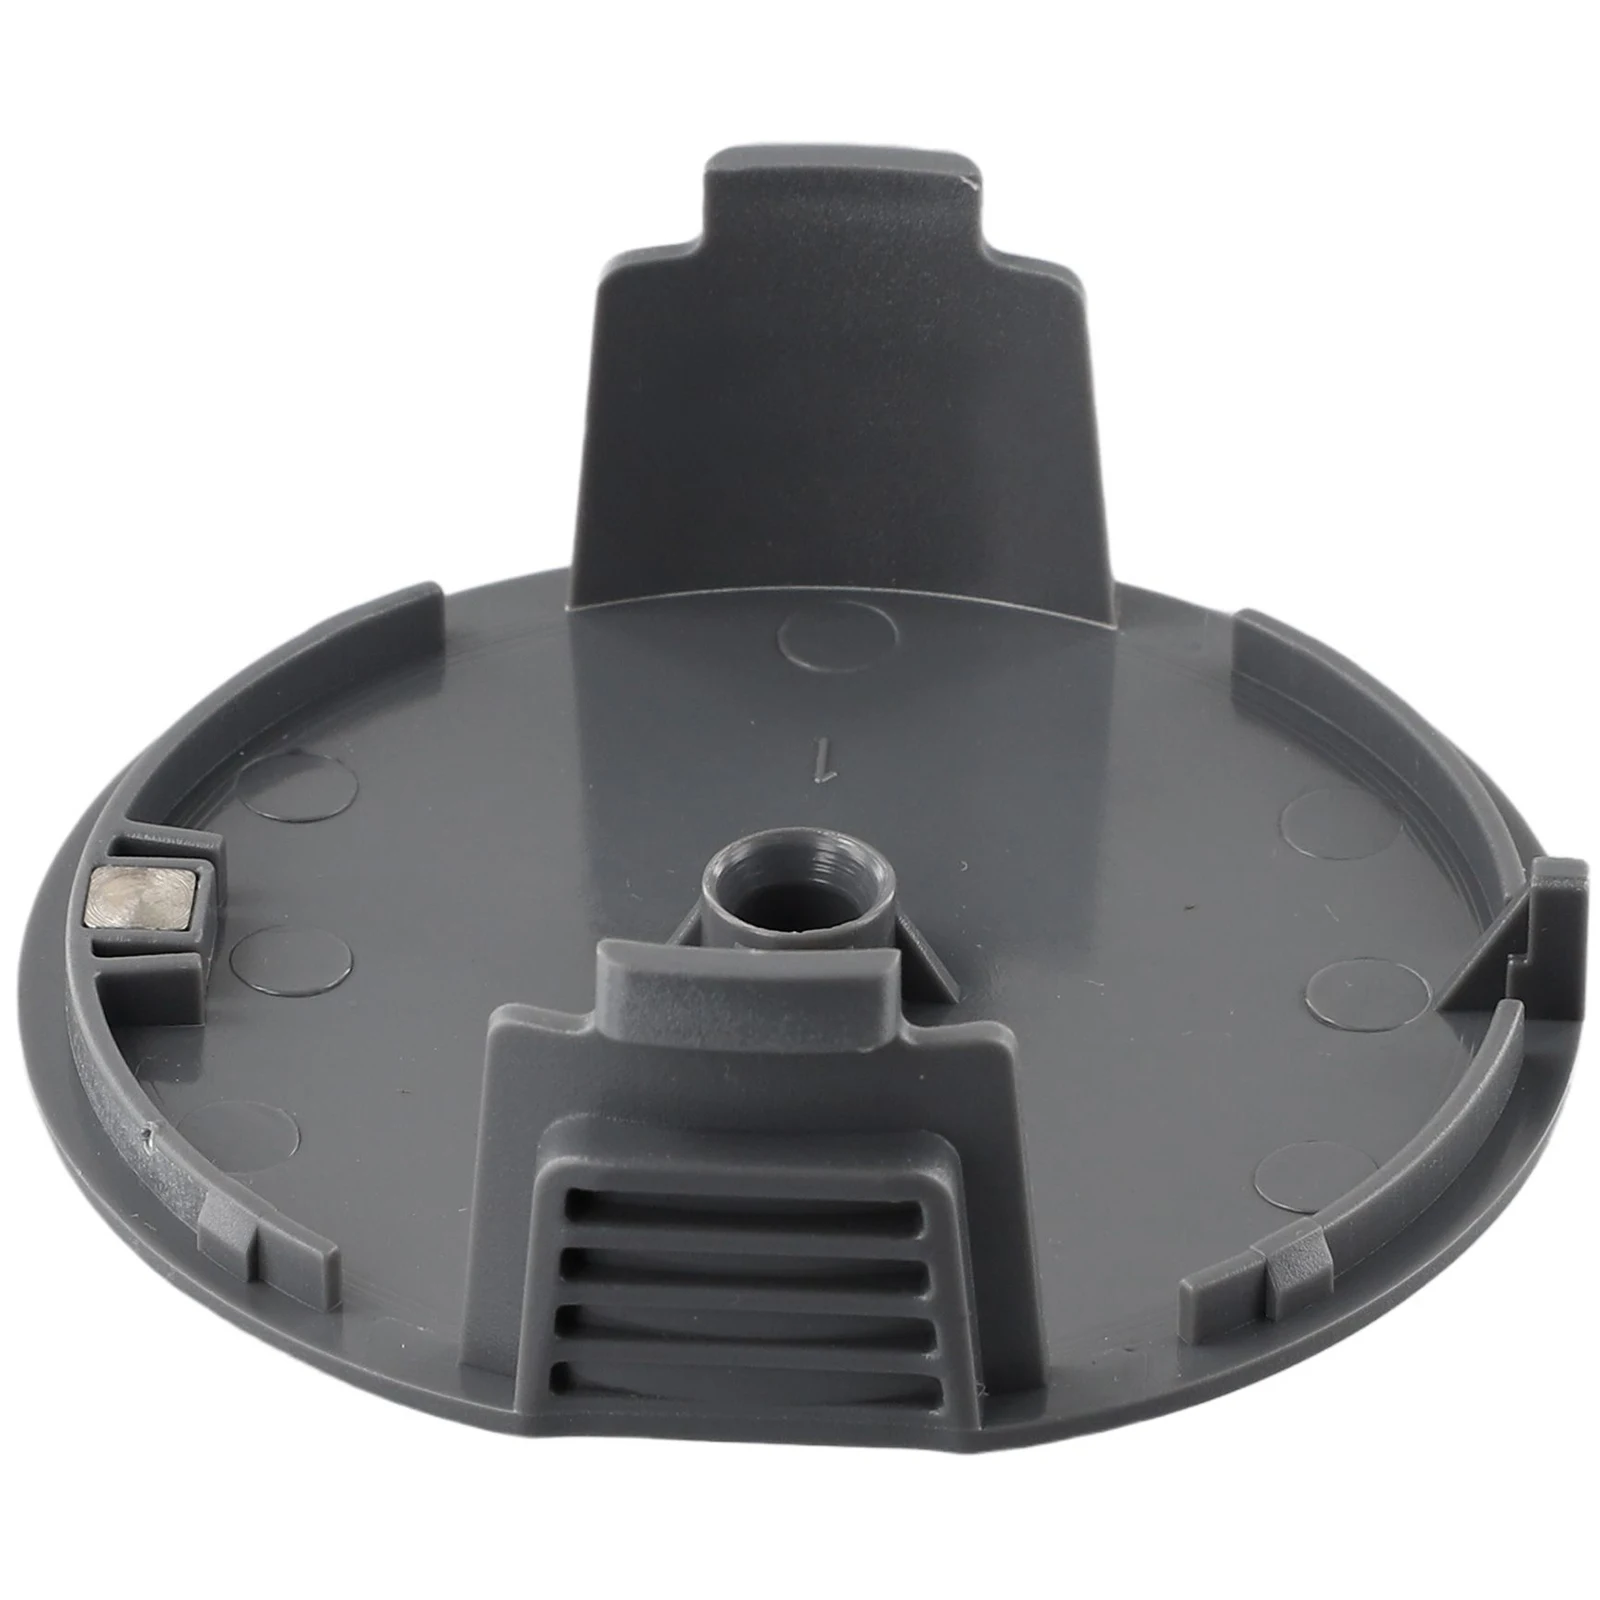 

Cap Spool Cover Strimmer Trimmer Accessories Easy Grass Cut F016F05320 Lawn Mower For Bosch 18-230 18-26 18-260